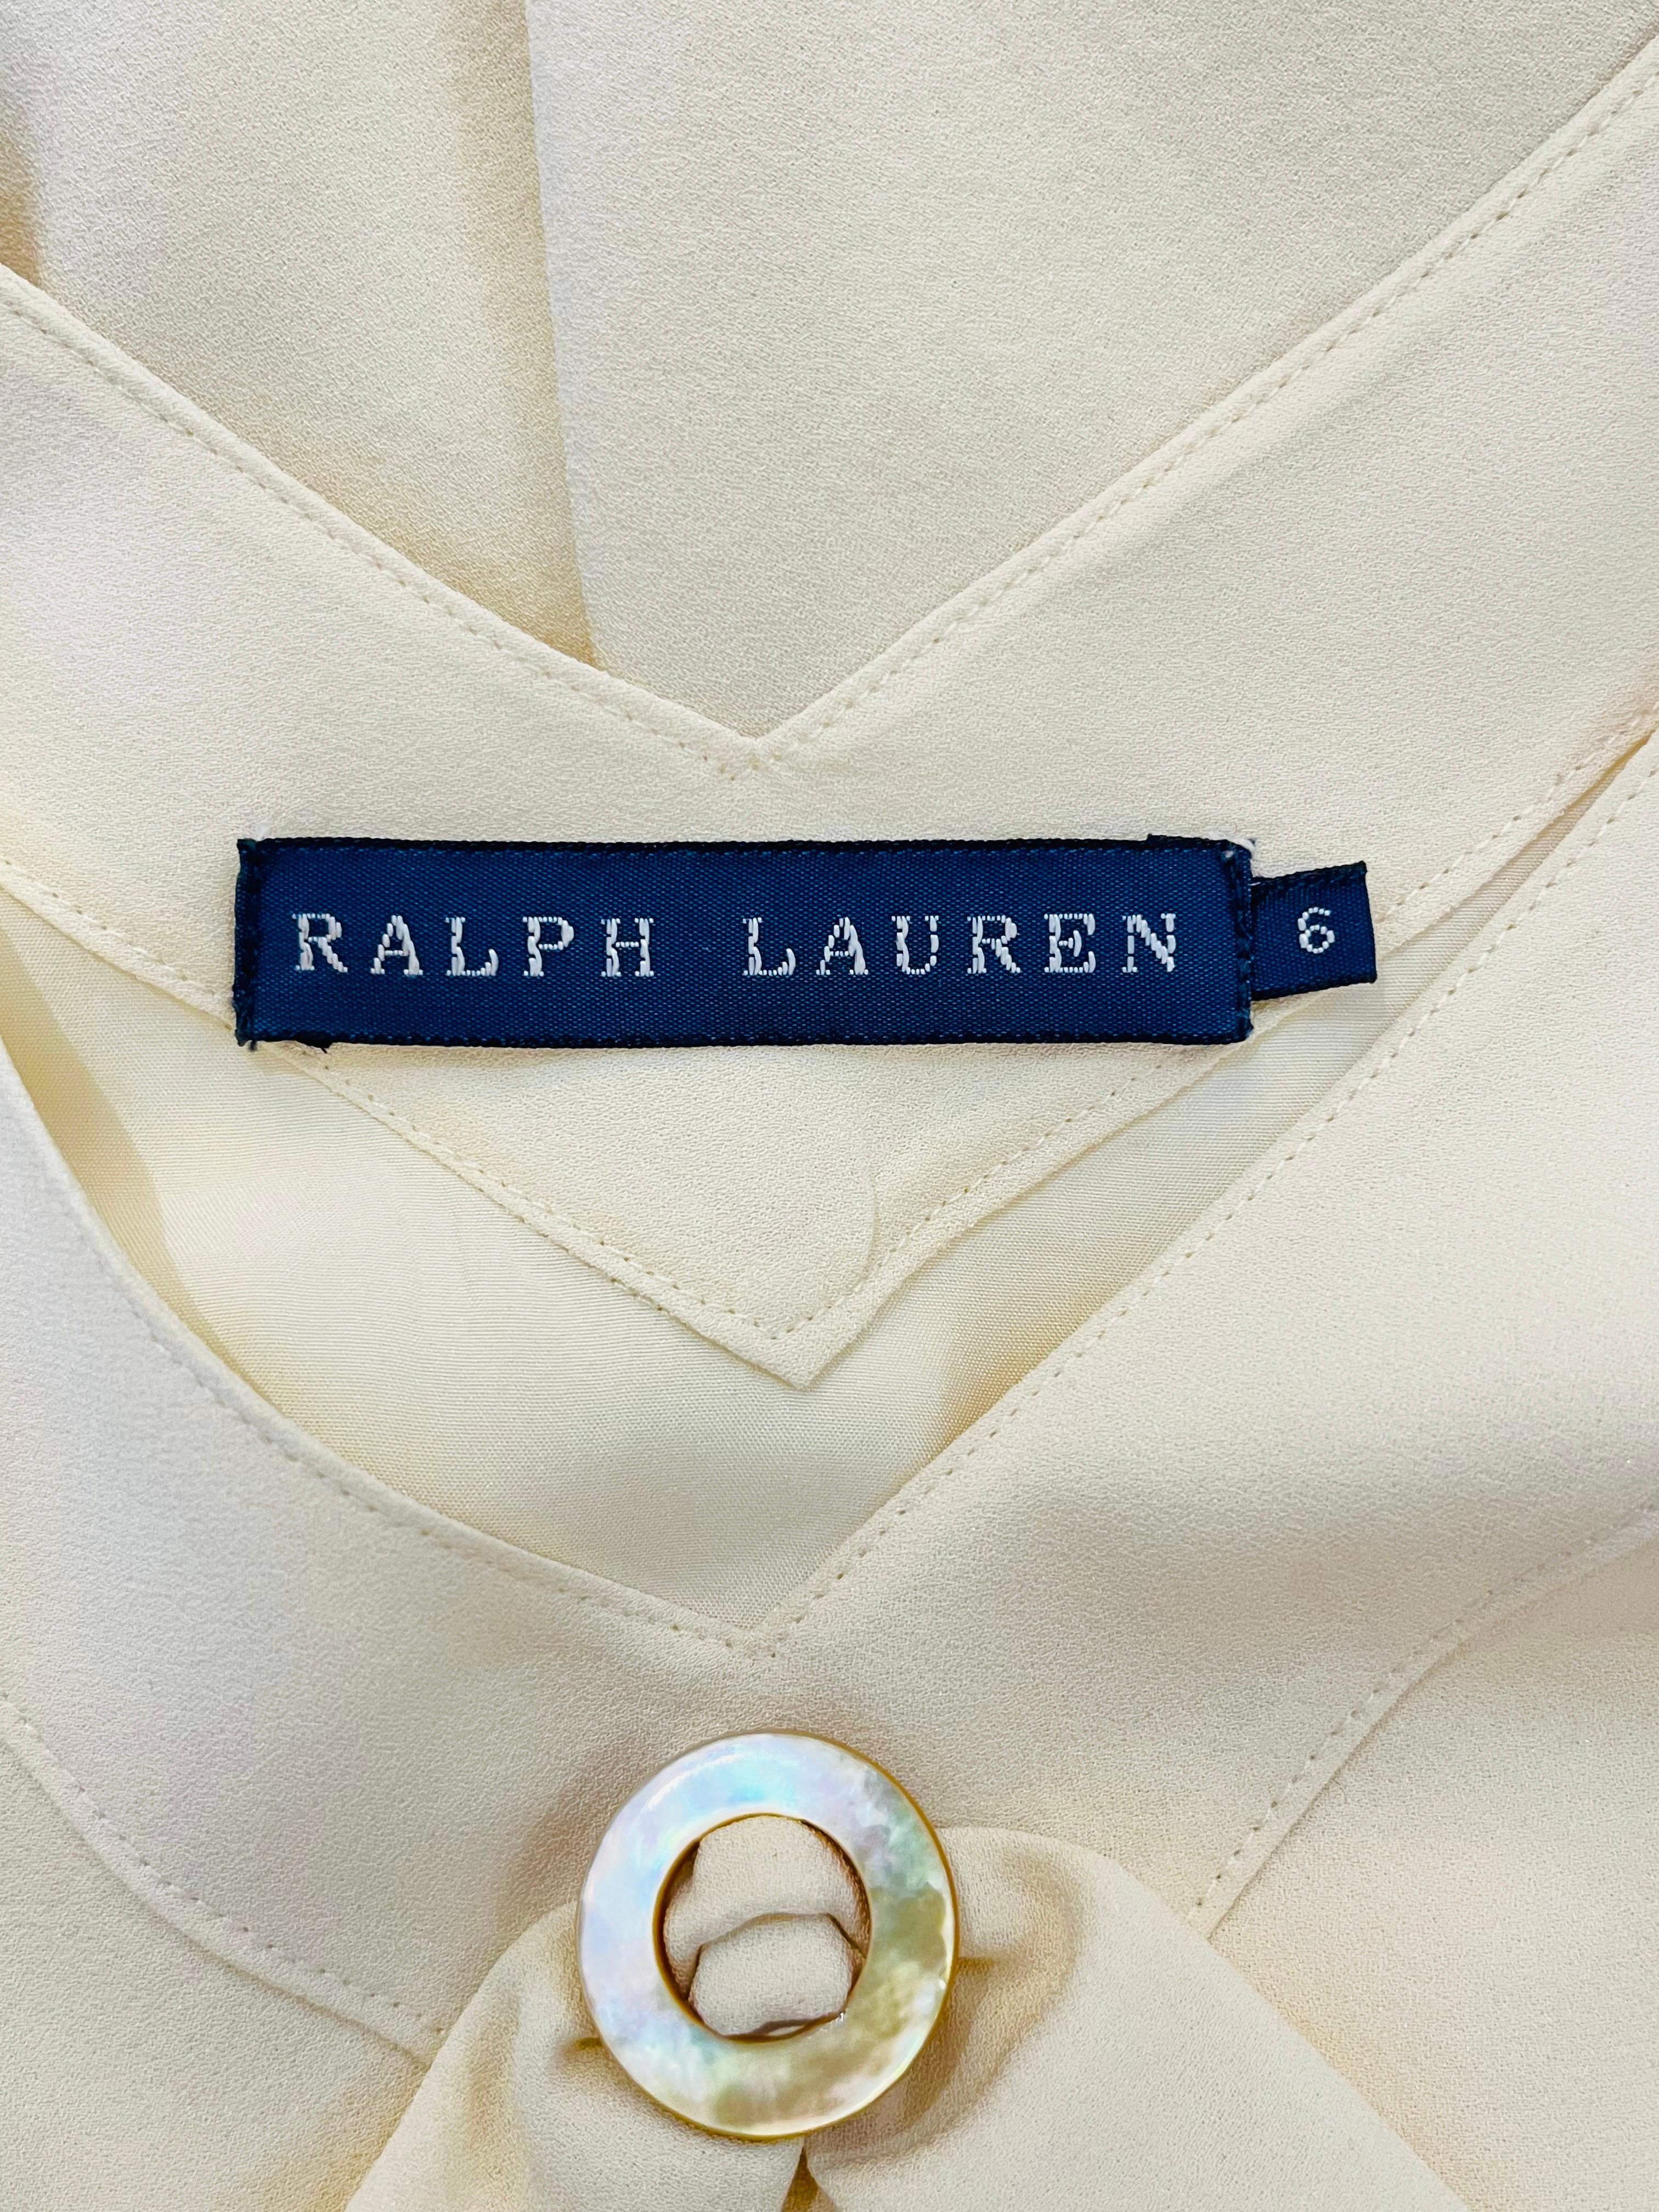 Ralph Lauren Silk Dress With Mother-Of-Pearl Details For Sale 1